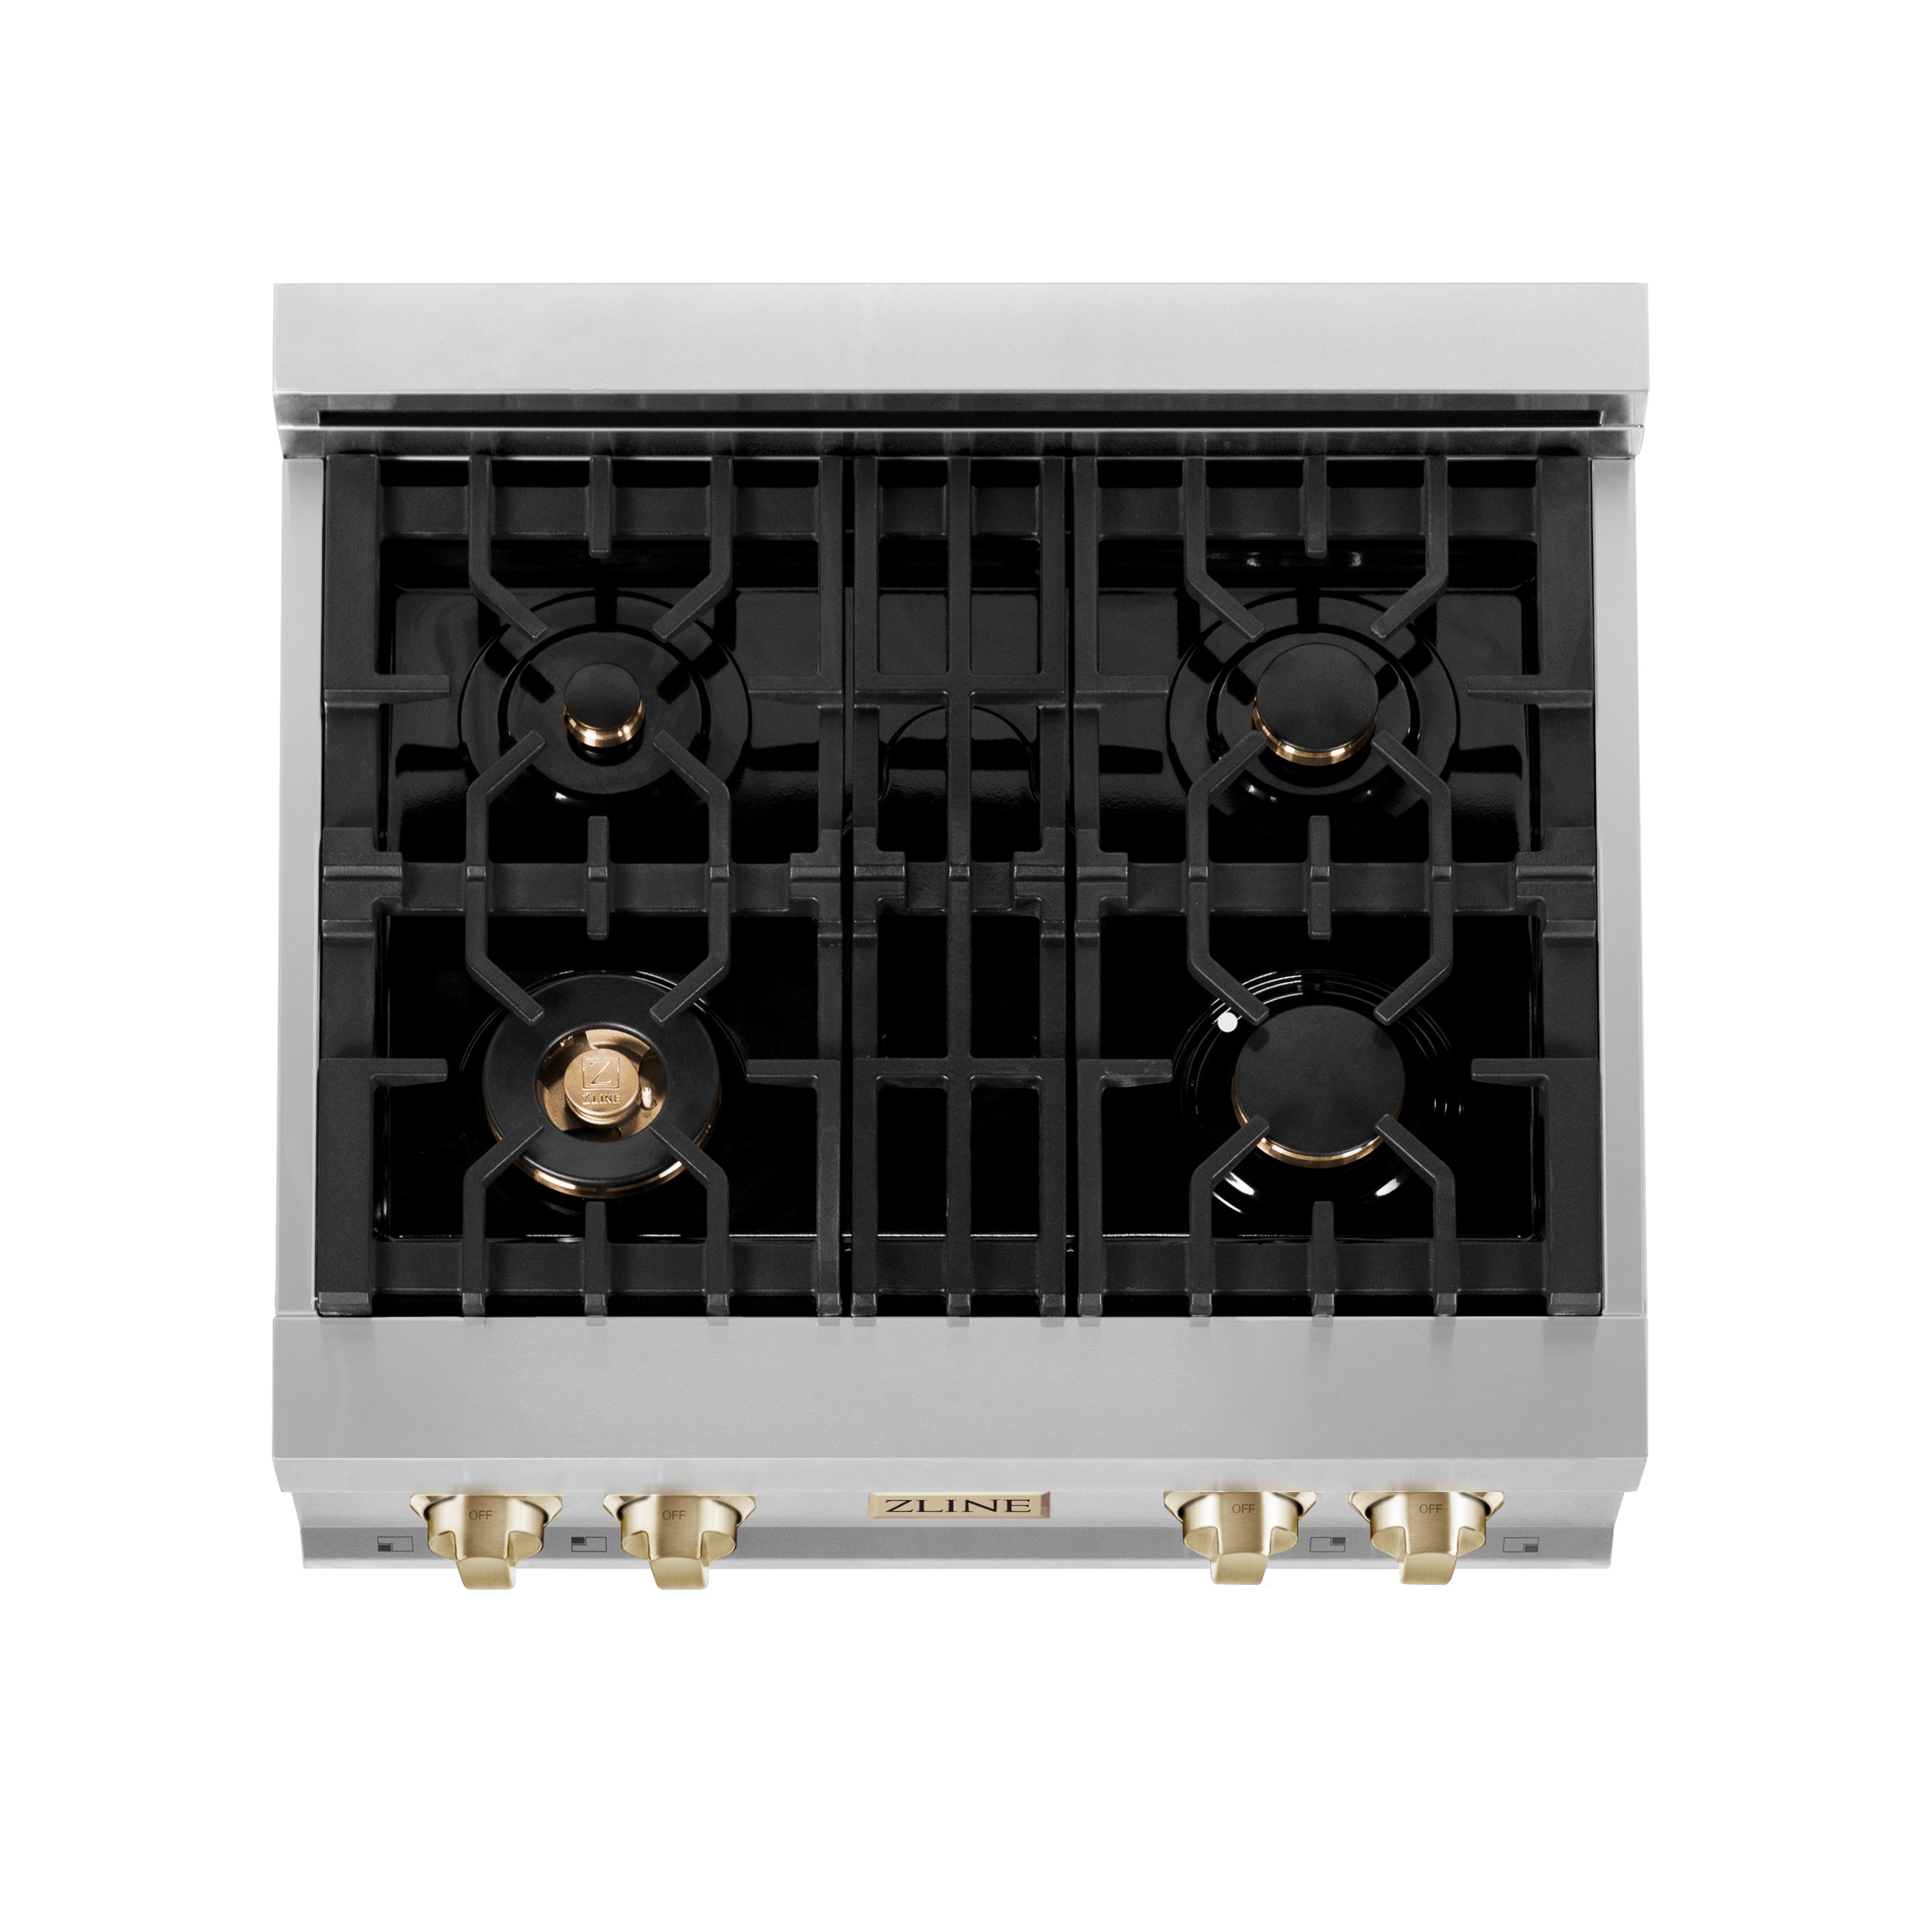 ZLINE Autograph Edition 30" Porcelain Rangetop with 4 Gas Burners in Stainless Steel and Gold Accents (RTZ-30-G)